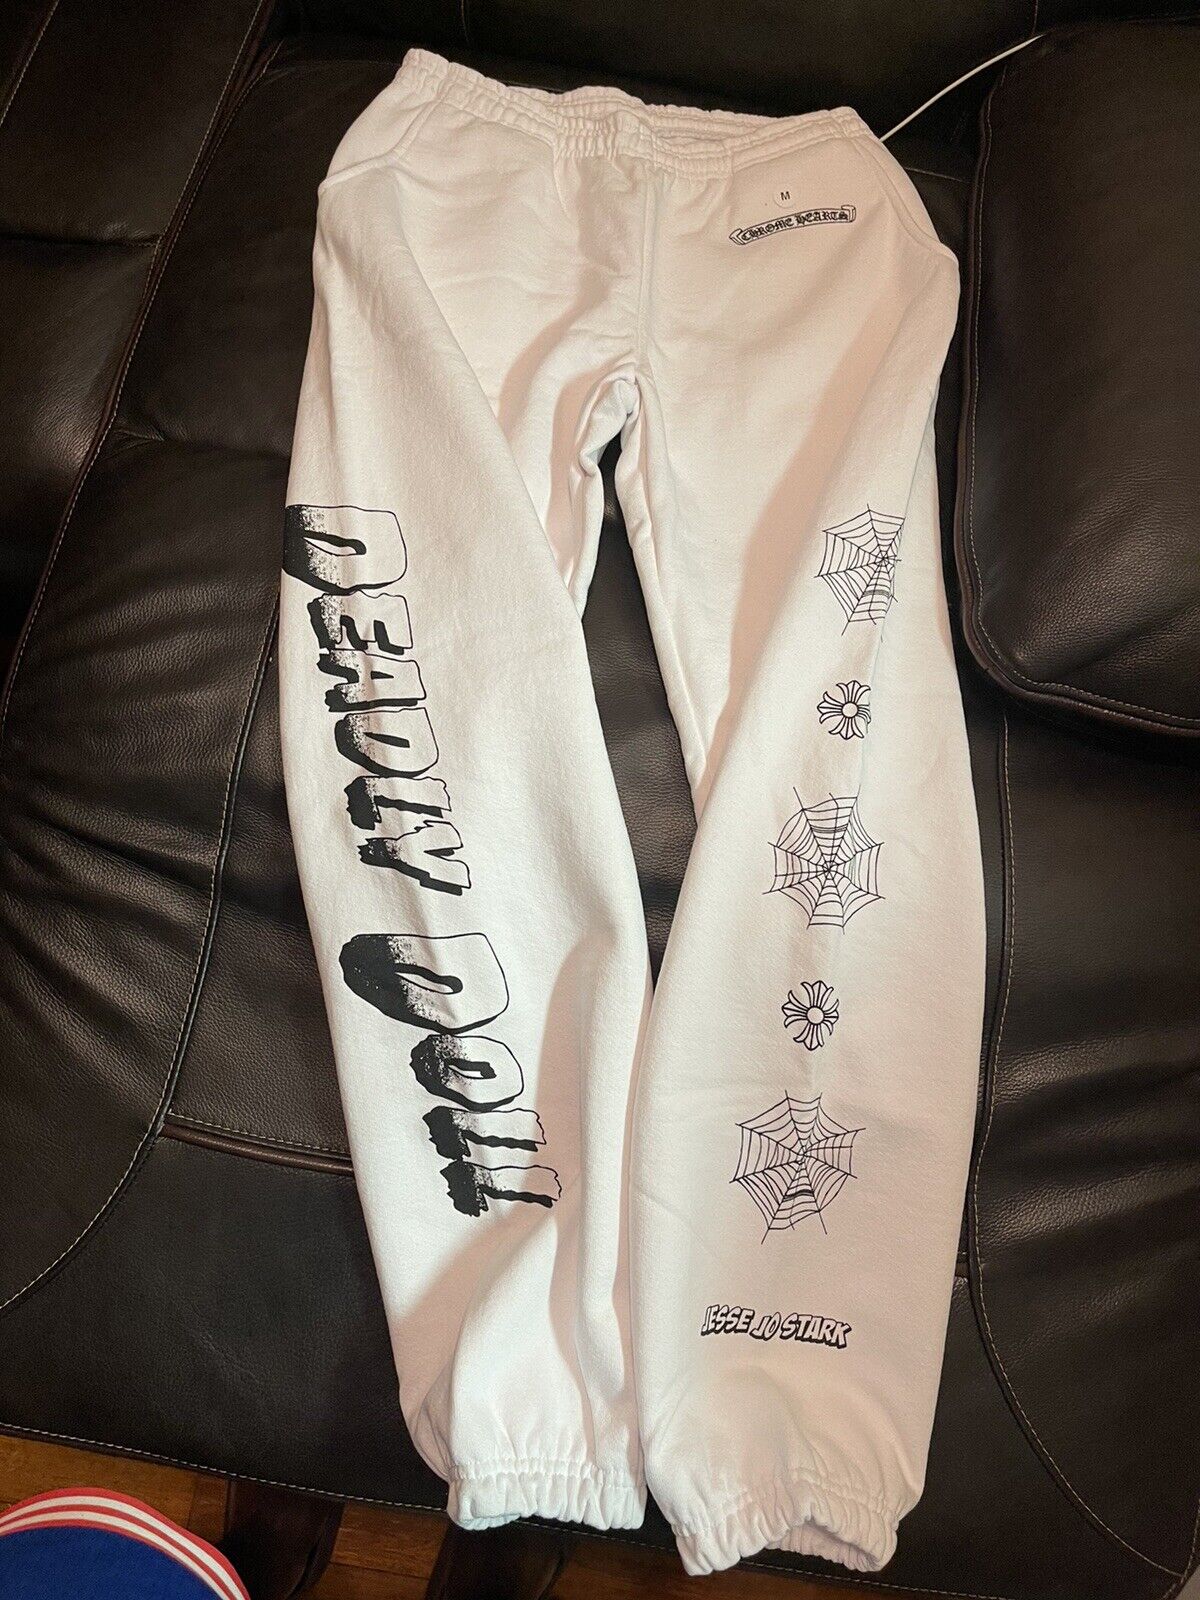 Chrome heart deadly doll sweat pants size M worn once